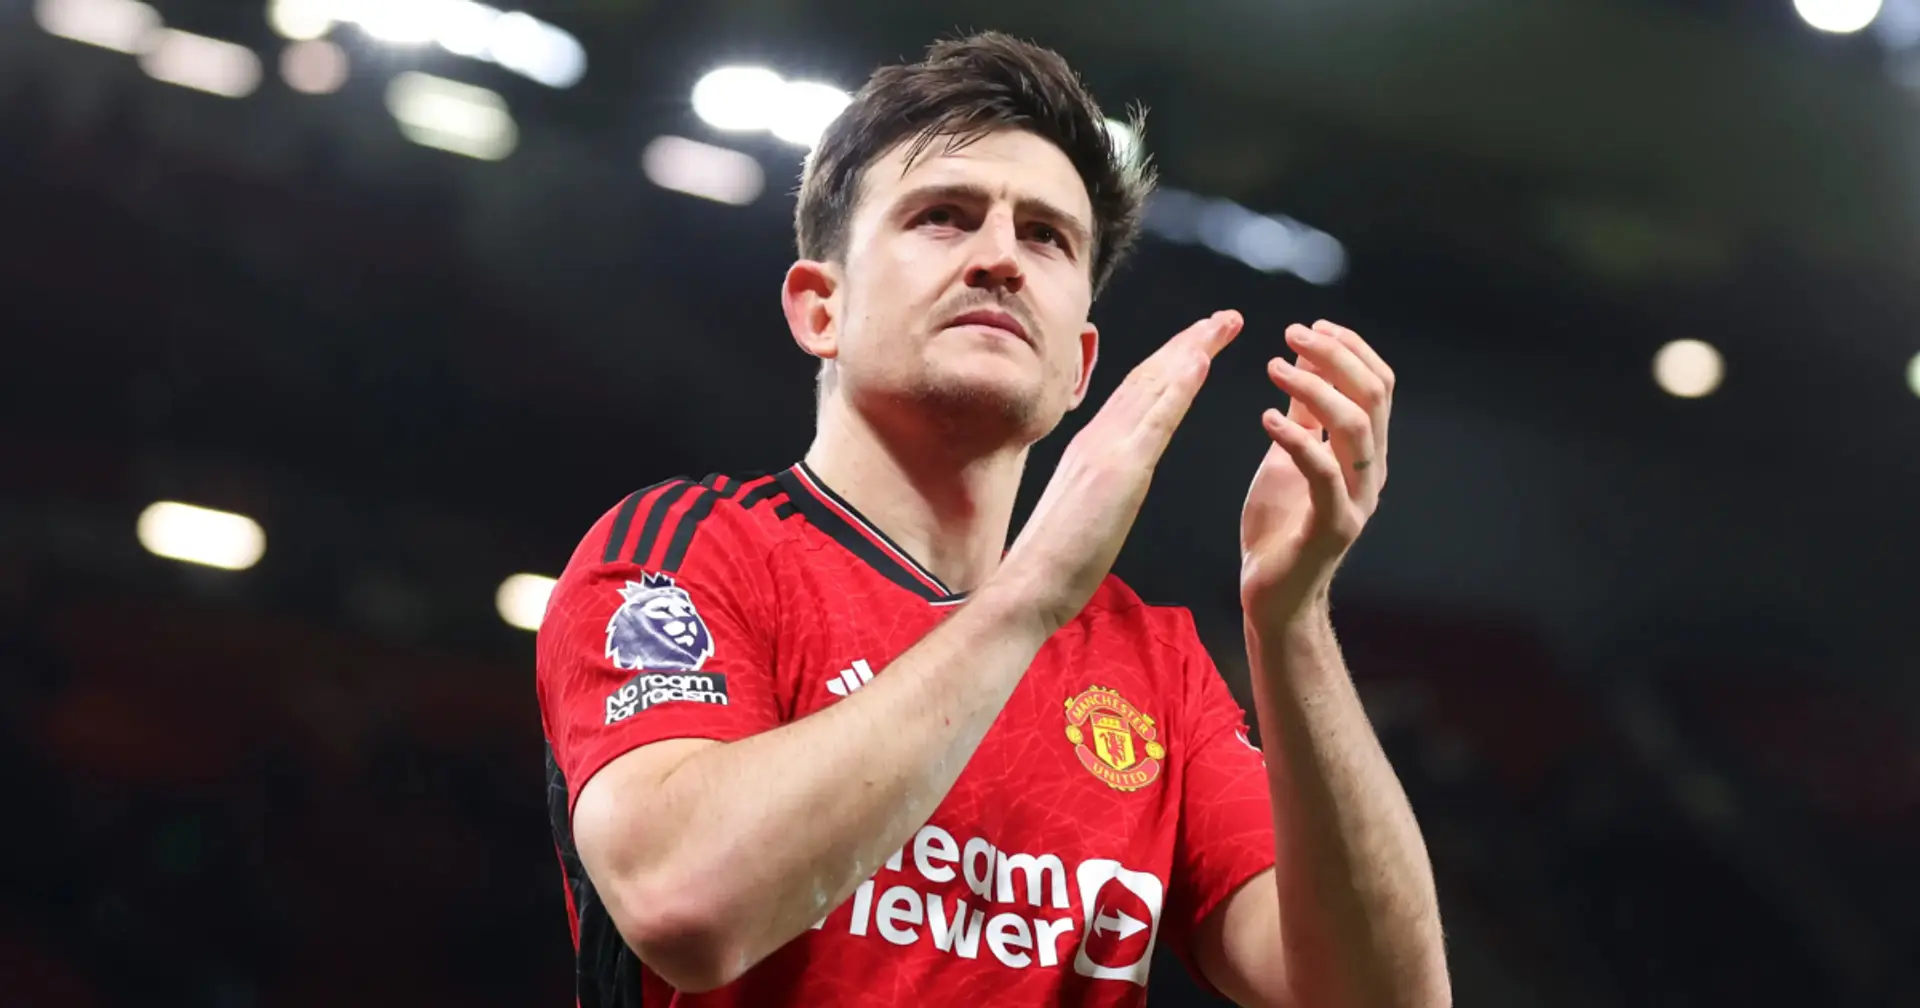 'Contender for Player of the Year': Man United fans happy with news on Harry Maguire's future